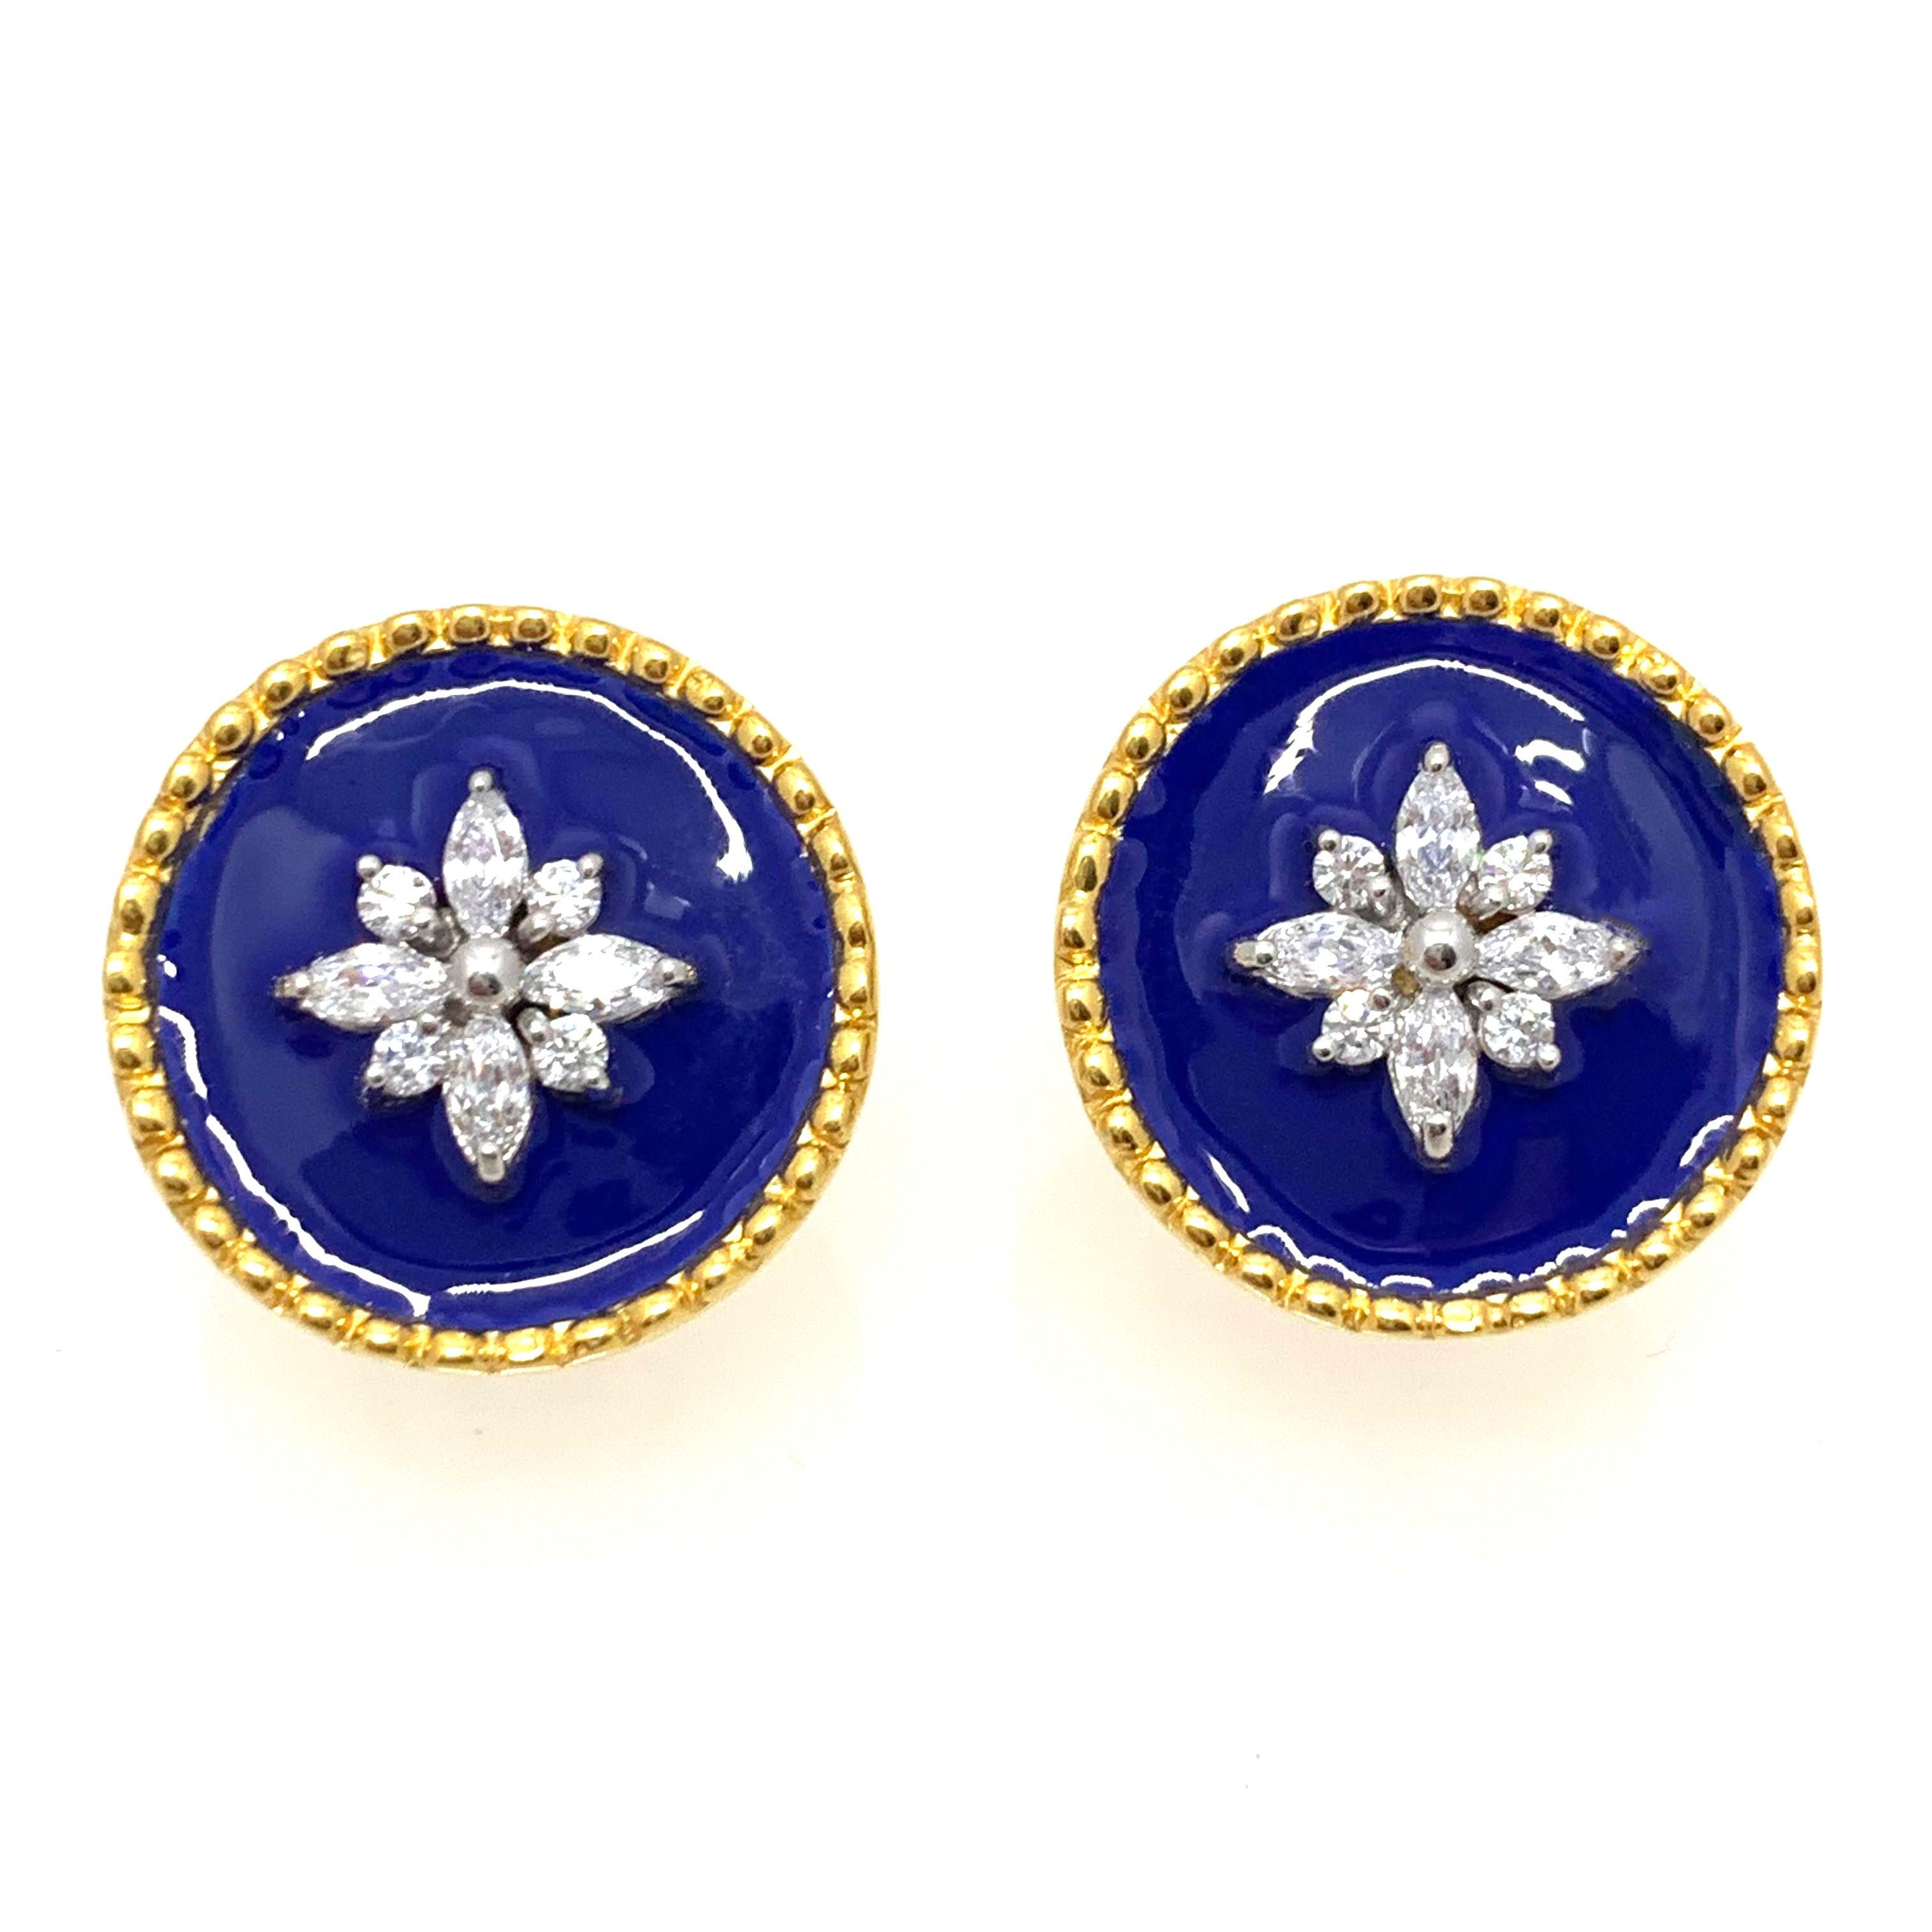 Stunning Royal Blue Enamel Flower Round Disc Sterling Silver Vermeil Earrings

This modern-style earrings features marquis and round simulated diamond cz handset in 18k gold vermeil sterling silver and layered over with beautiful royal blue enamel -